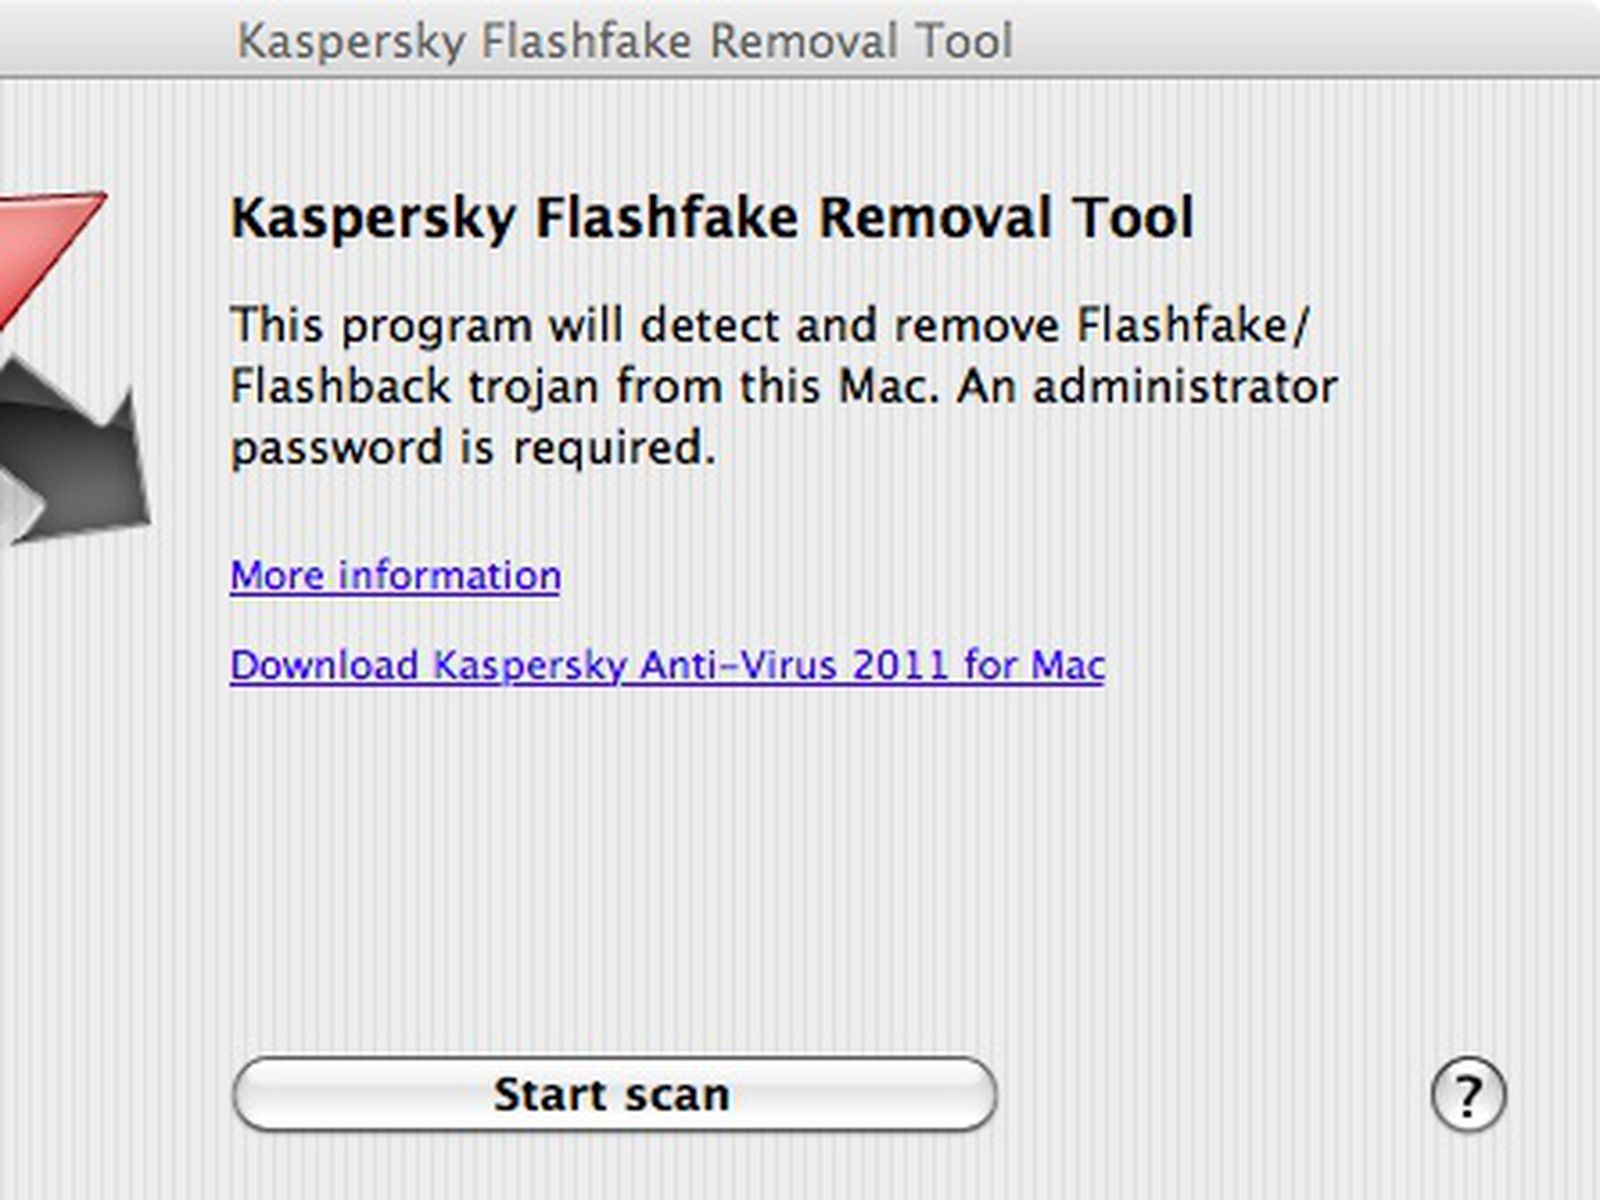 f secure flashback removal tool for mac